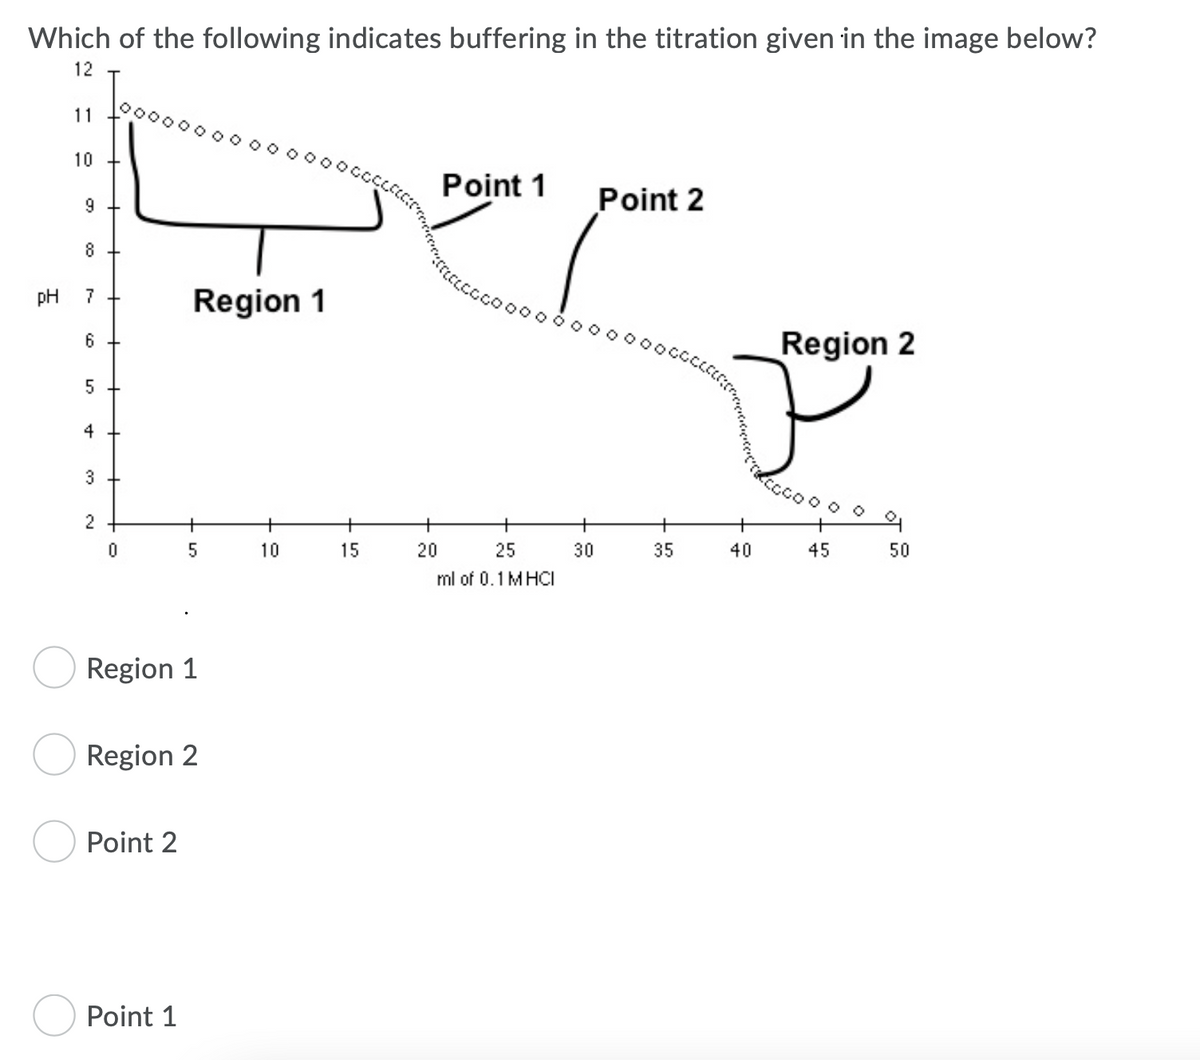 Which of the following indicates buffering in the titration given in the image below?
12
11
10
Point 1
Point 2
9
8
pH
7
Region 1
Region 2
6 +
4
3
2
+
+
+
+
+
10
15
20
25
30
35
40
45
50
ml of 0.1 MHCI
Region 1
Region 2
Point 2
Point 1
